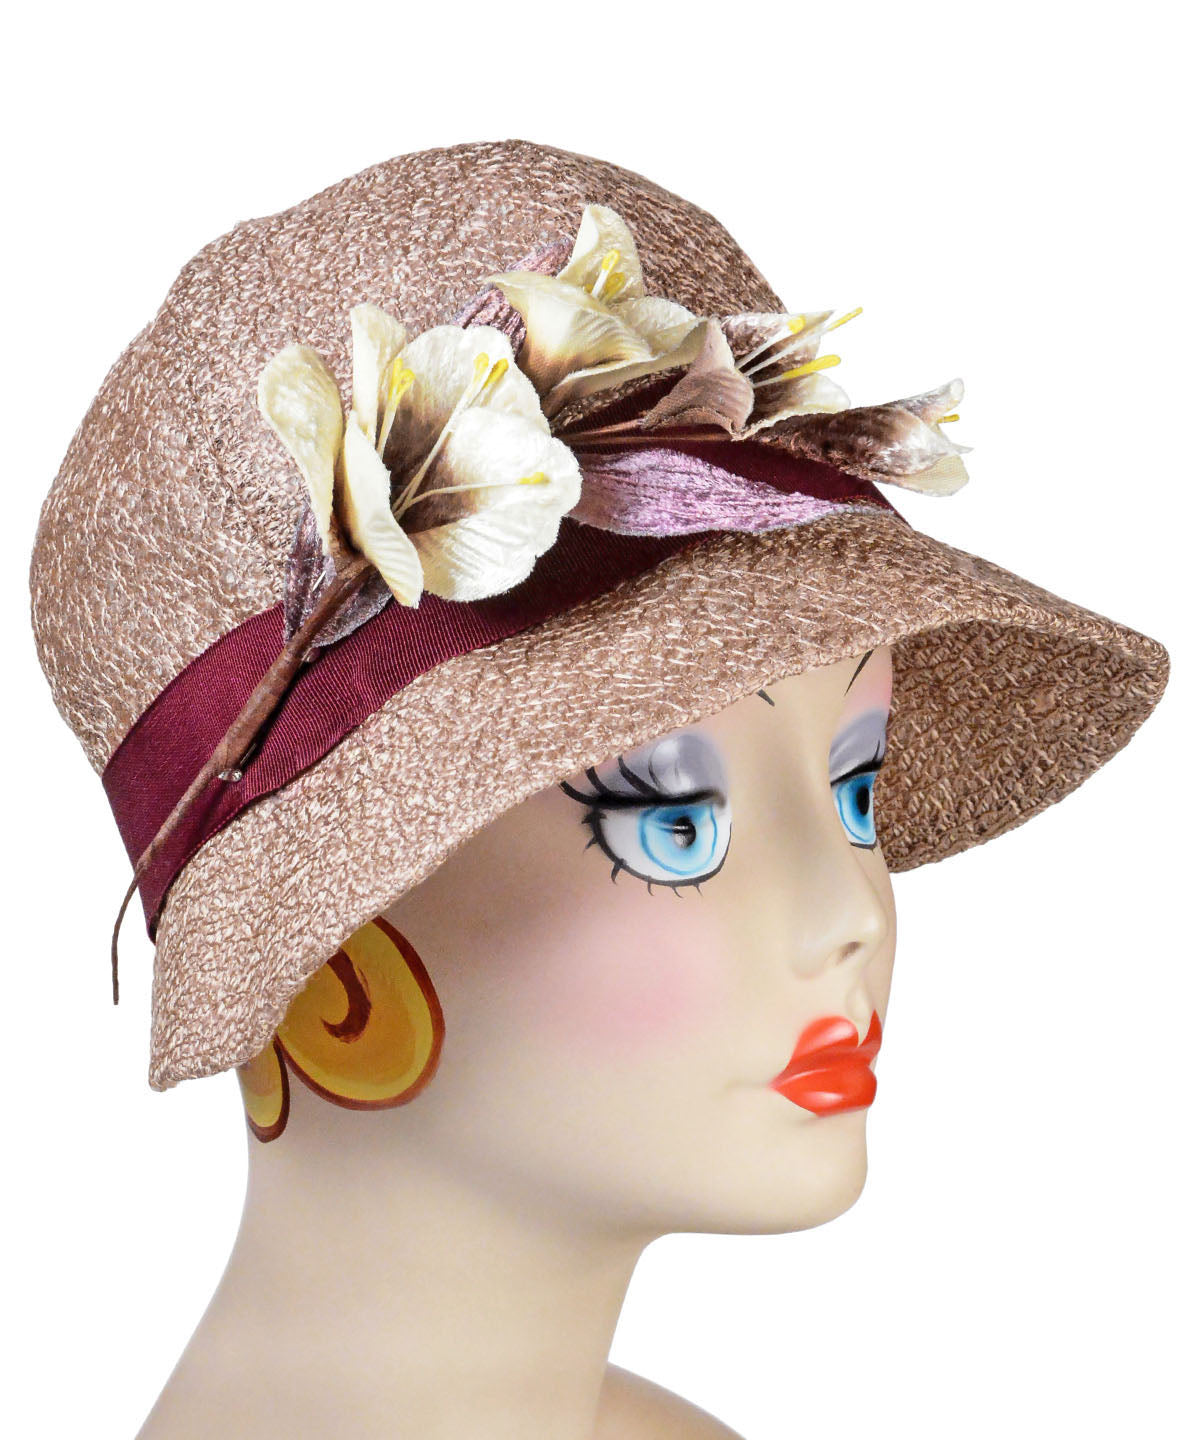 Grace Cloche Style Hat Tumbleweed in Champagne with Burgundy Grosgrain featuring Two Cream Flowers Feather Brooch | By Pandemonium Millinery | Handmade in Seattle WA USA